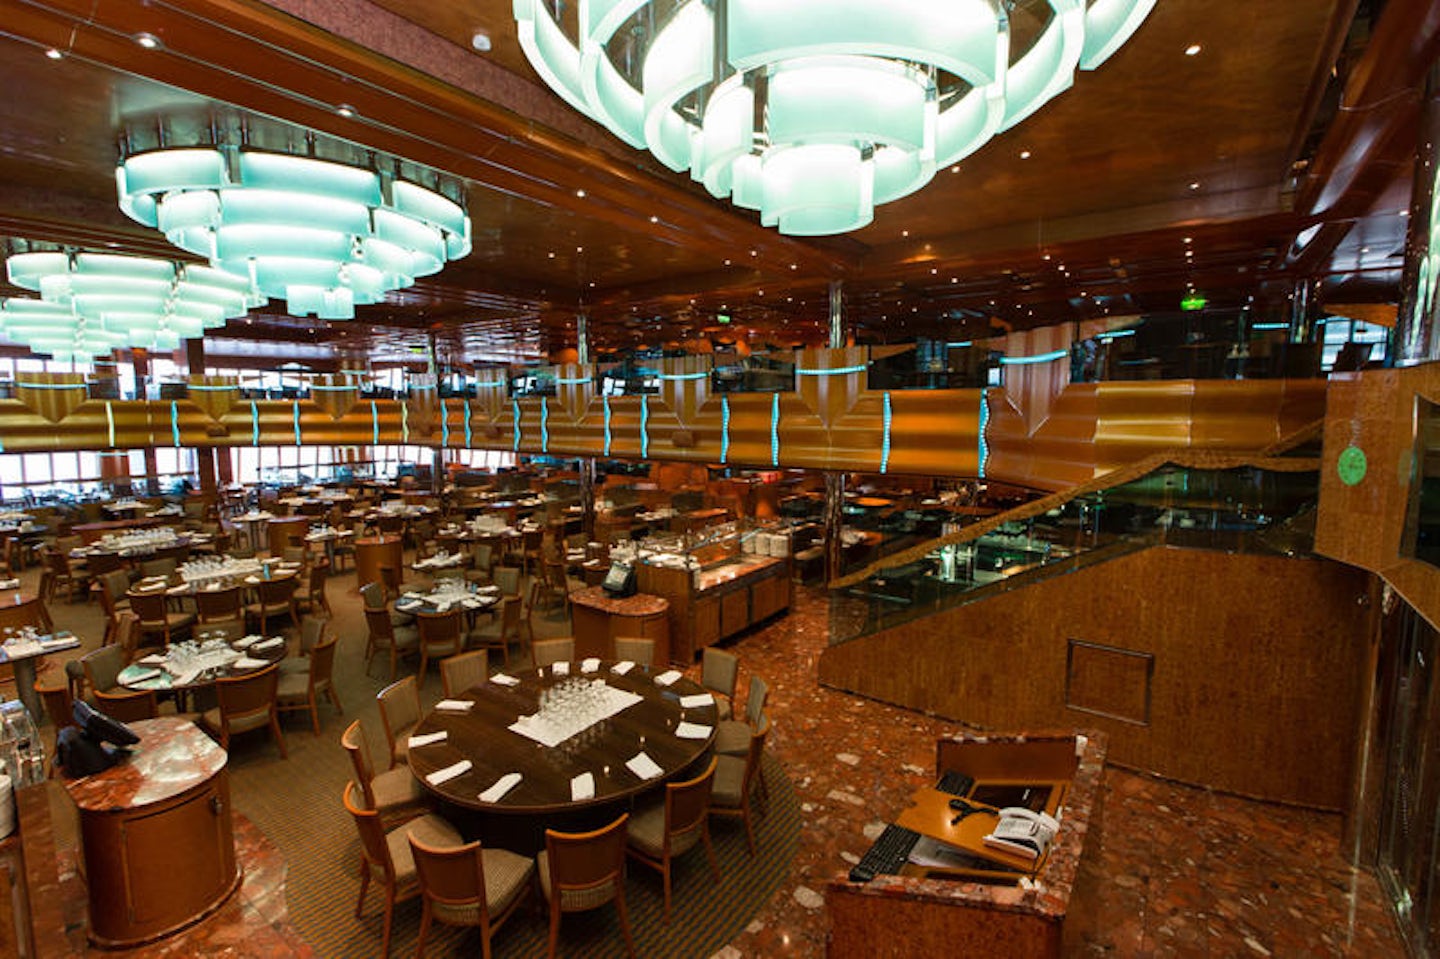 Southern Lights Dining Room on Carnival Magic Cruise Ship - Cruise Critic